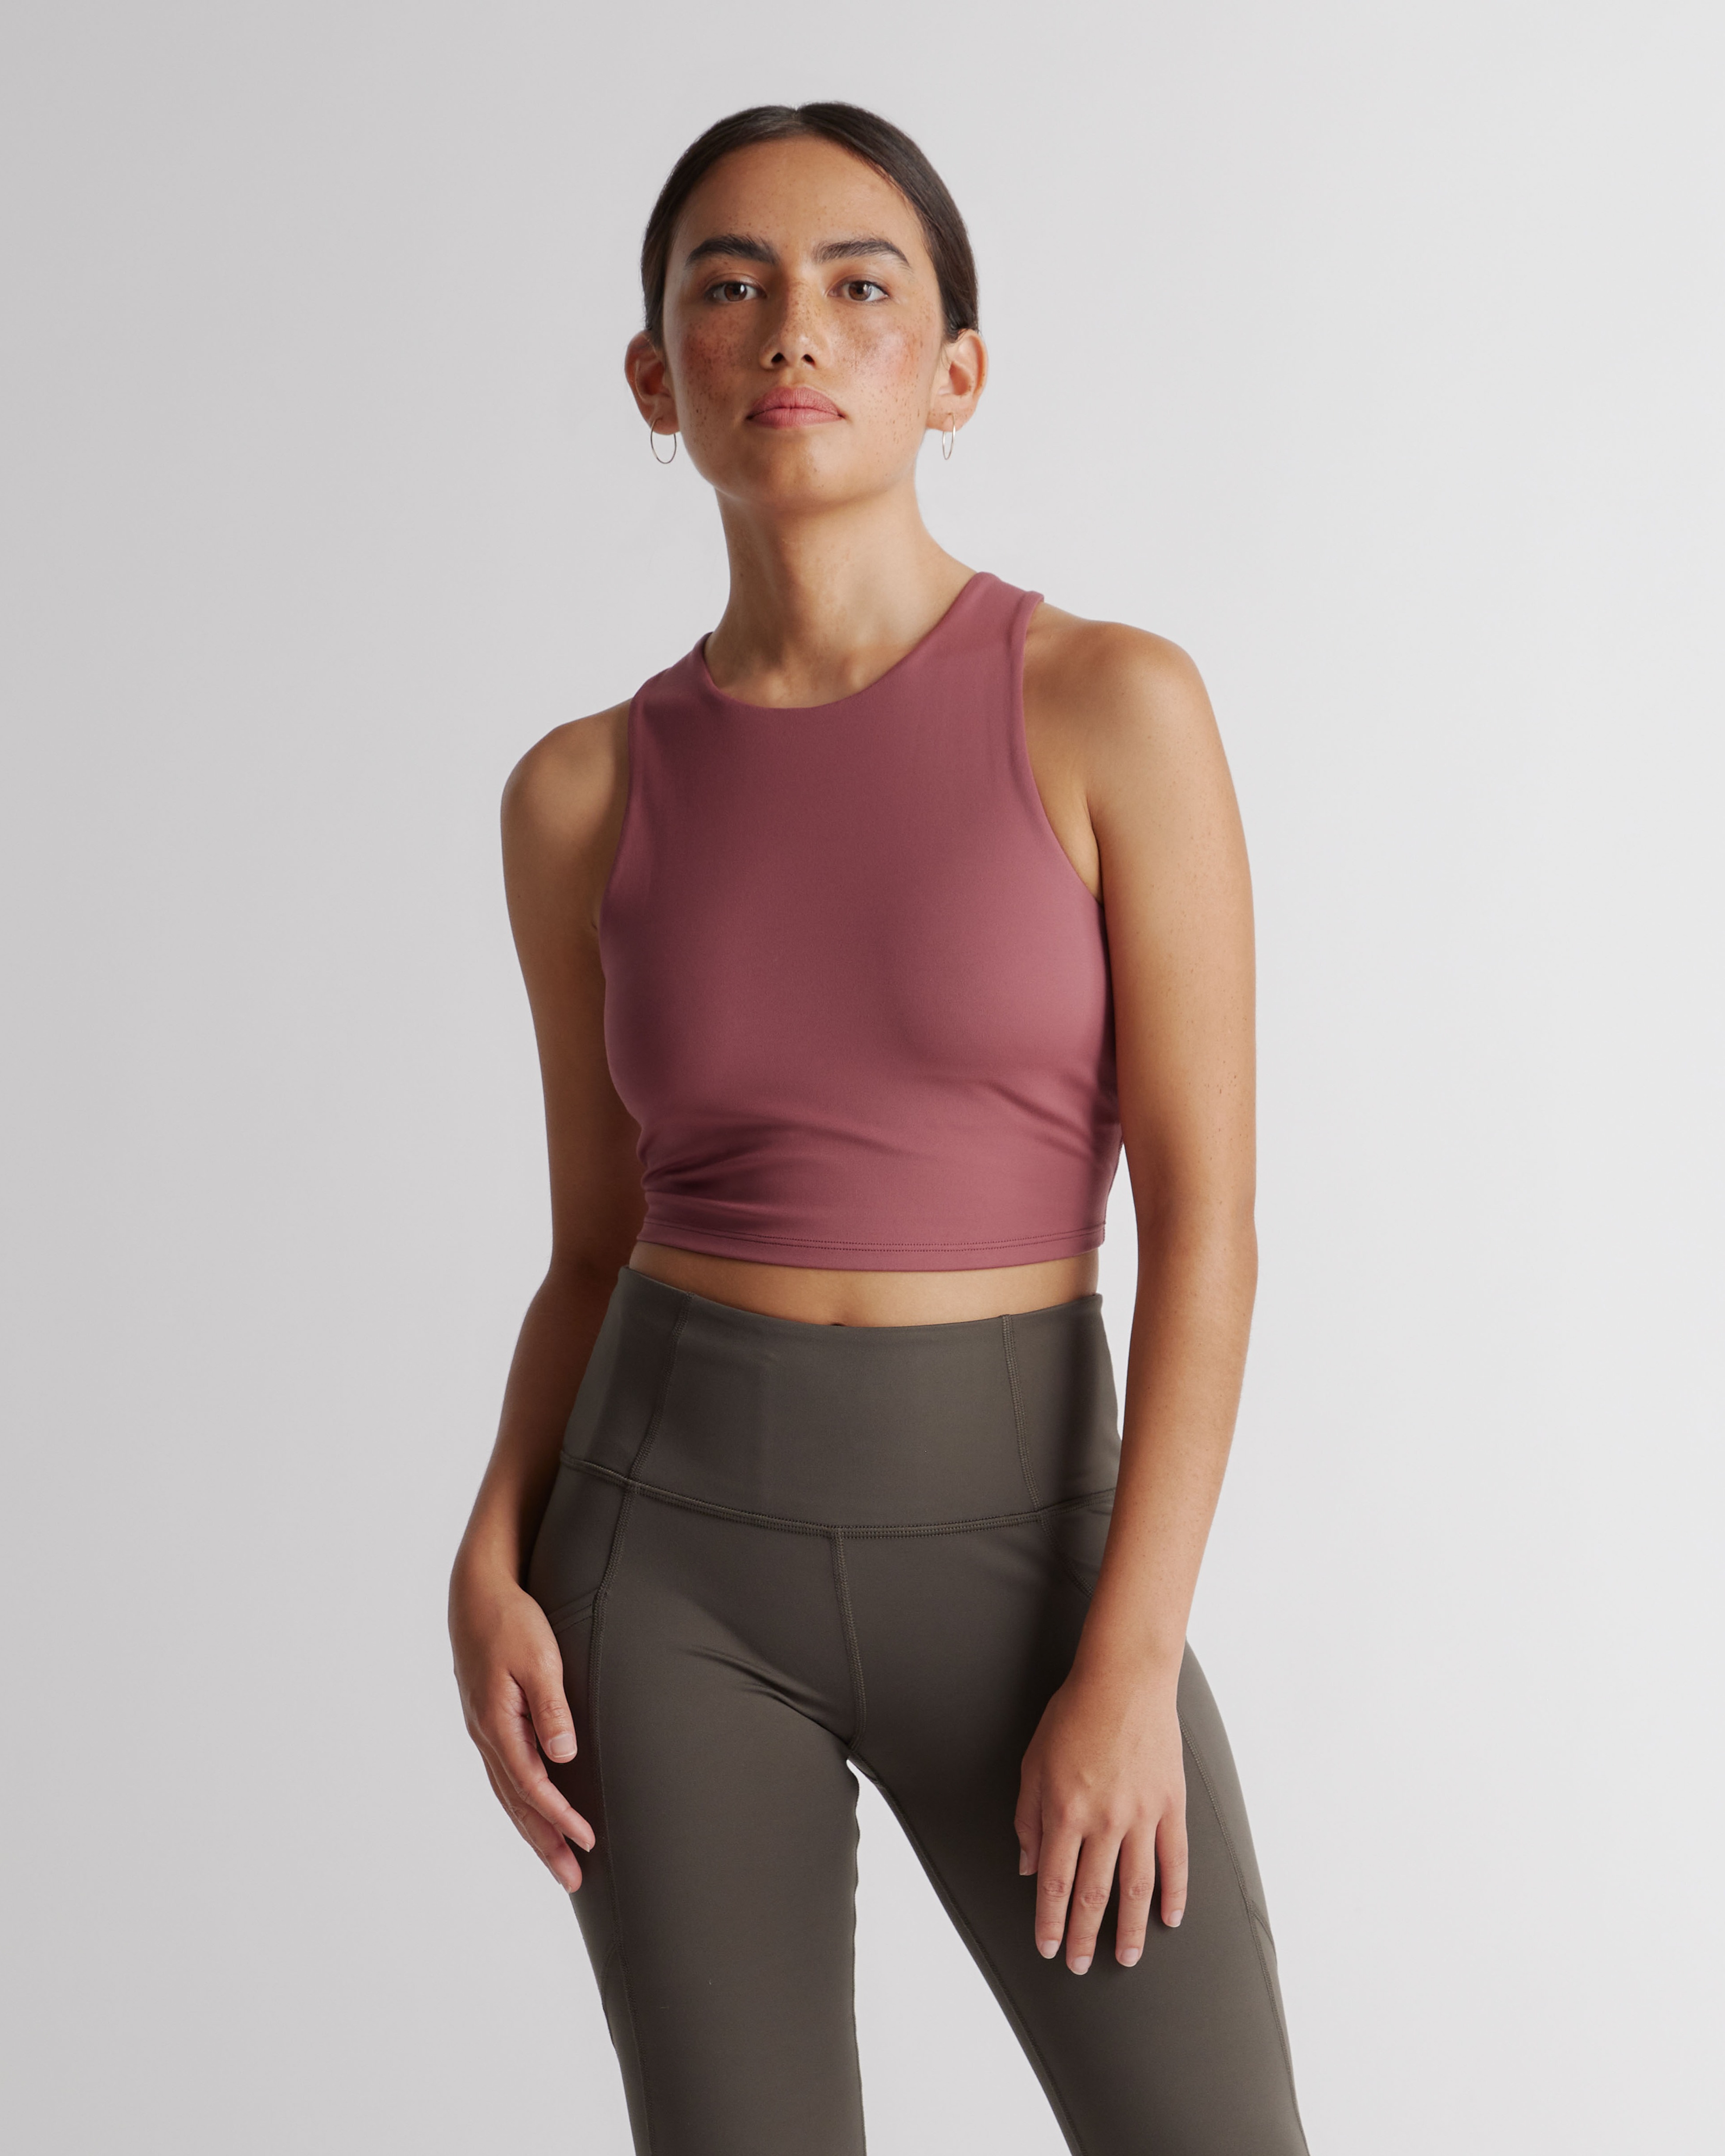 My lululemon Workout Essentials - The House of Sequins